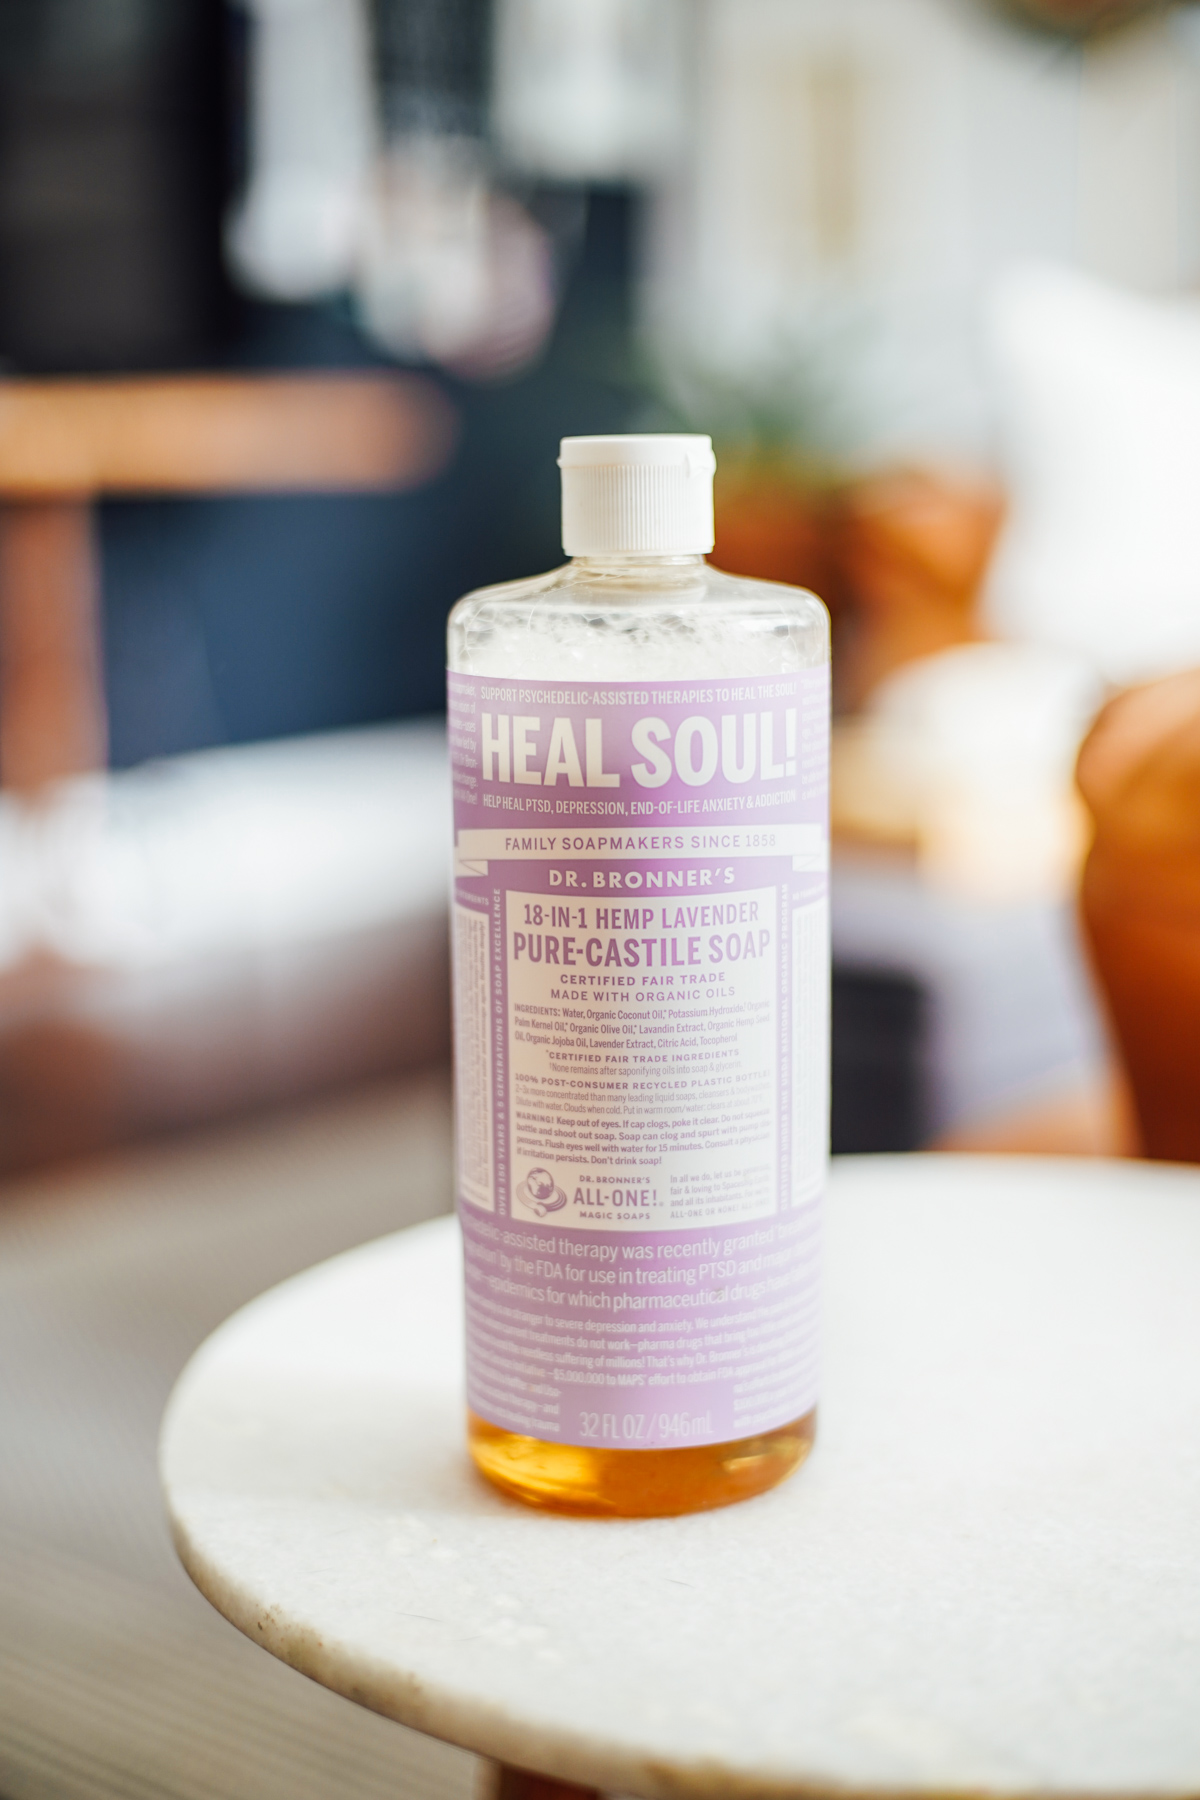 32-ounce liquid castile soap bottle in lavender scent on a table in a living room.